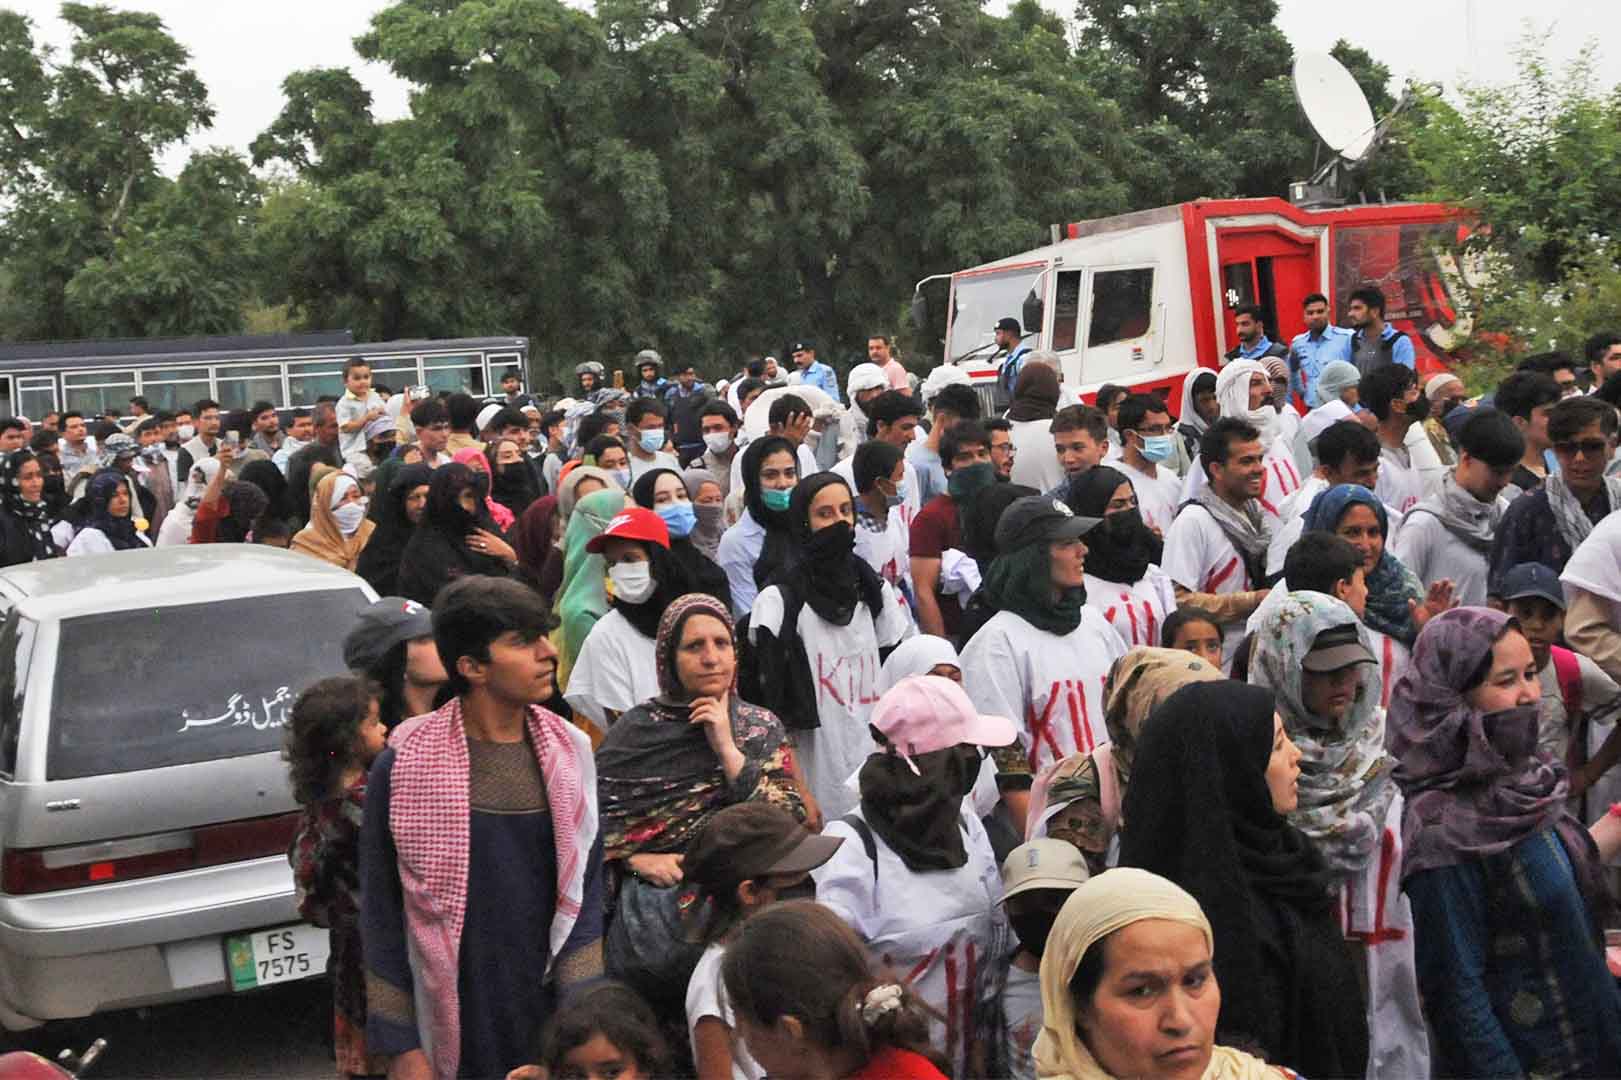 A group of Afghan refugees are pictured protesting in Islamabad, Pakistan, on May 19, 2022, demanding the United Nations High Commissioner for Refugees (UNHCR) to register them and help their asylum seeking process in Europe.